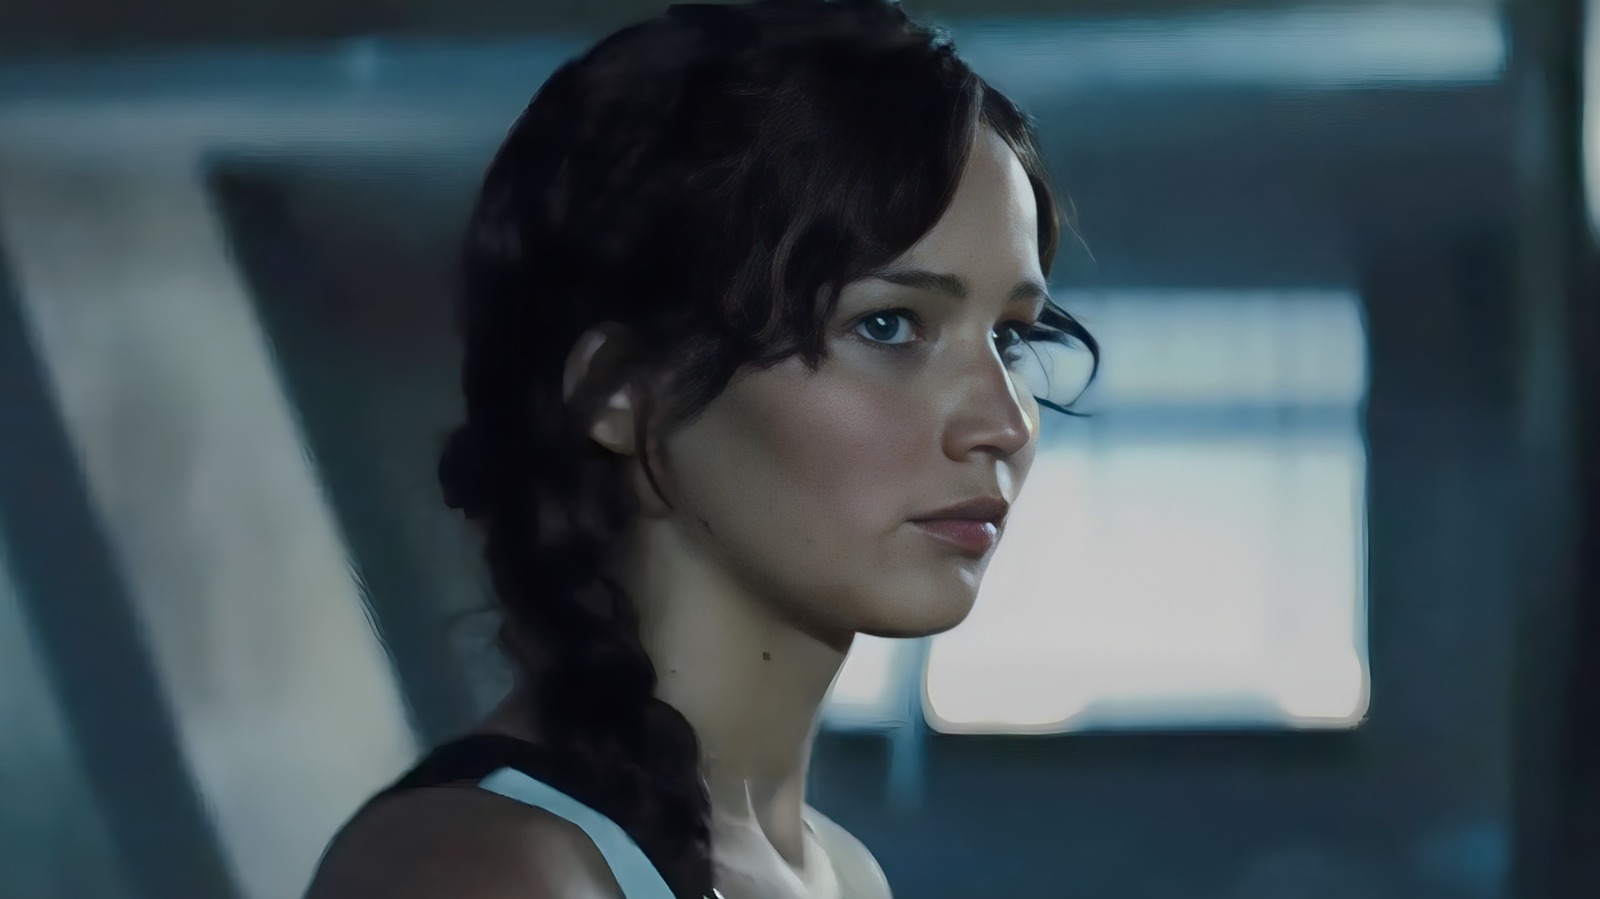 Jennifer Lawrence Is 'Totally' Open to Playing 'Hunger Games' Role Again